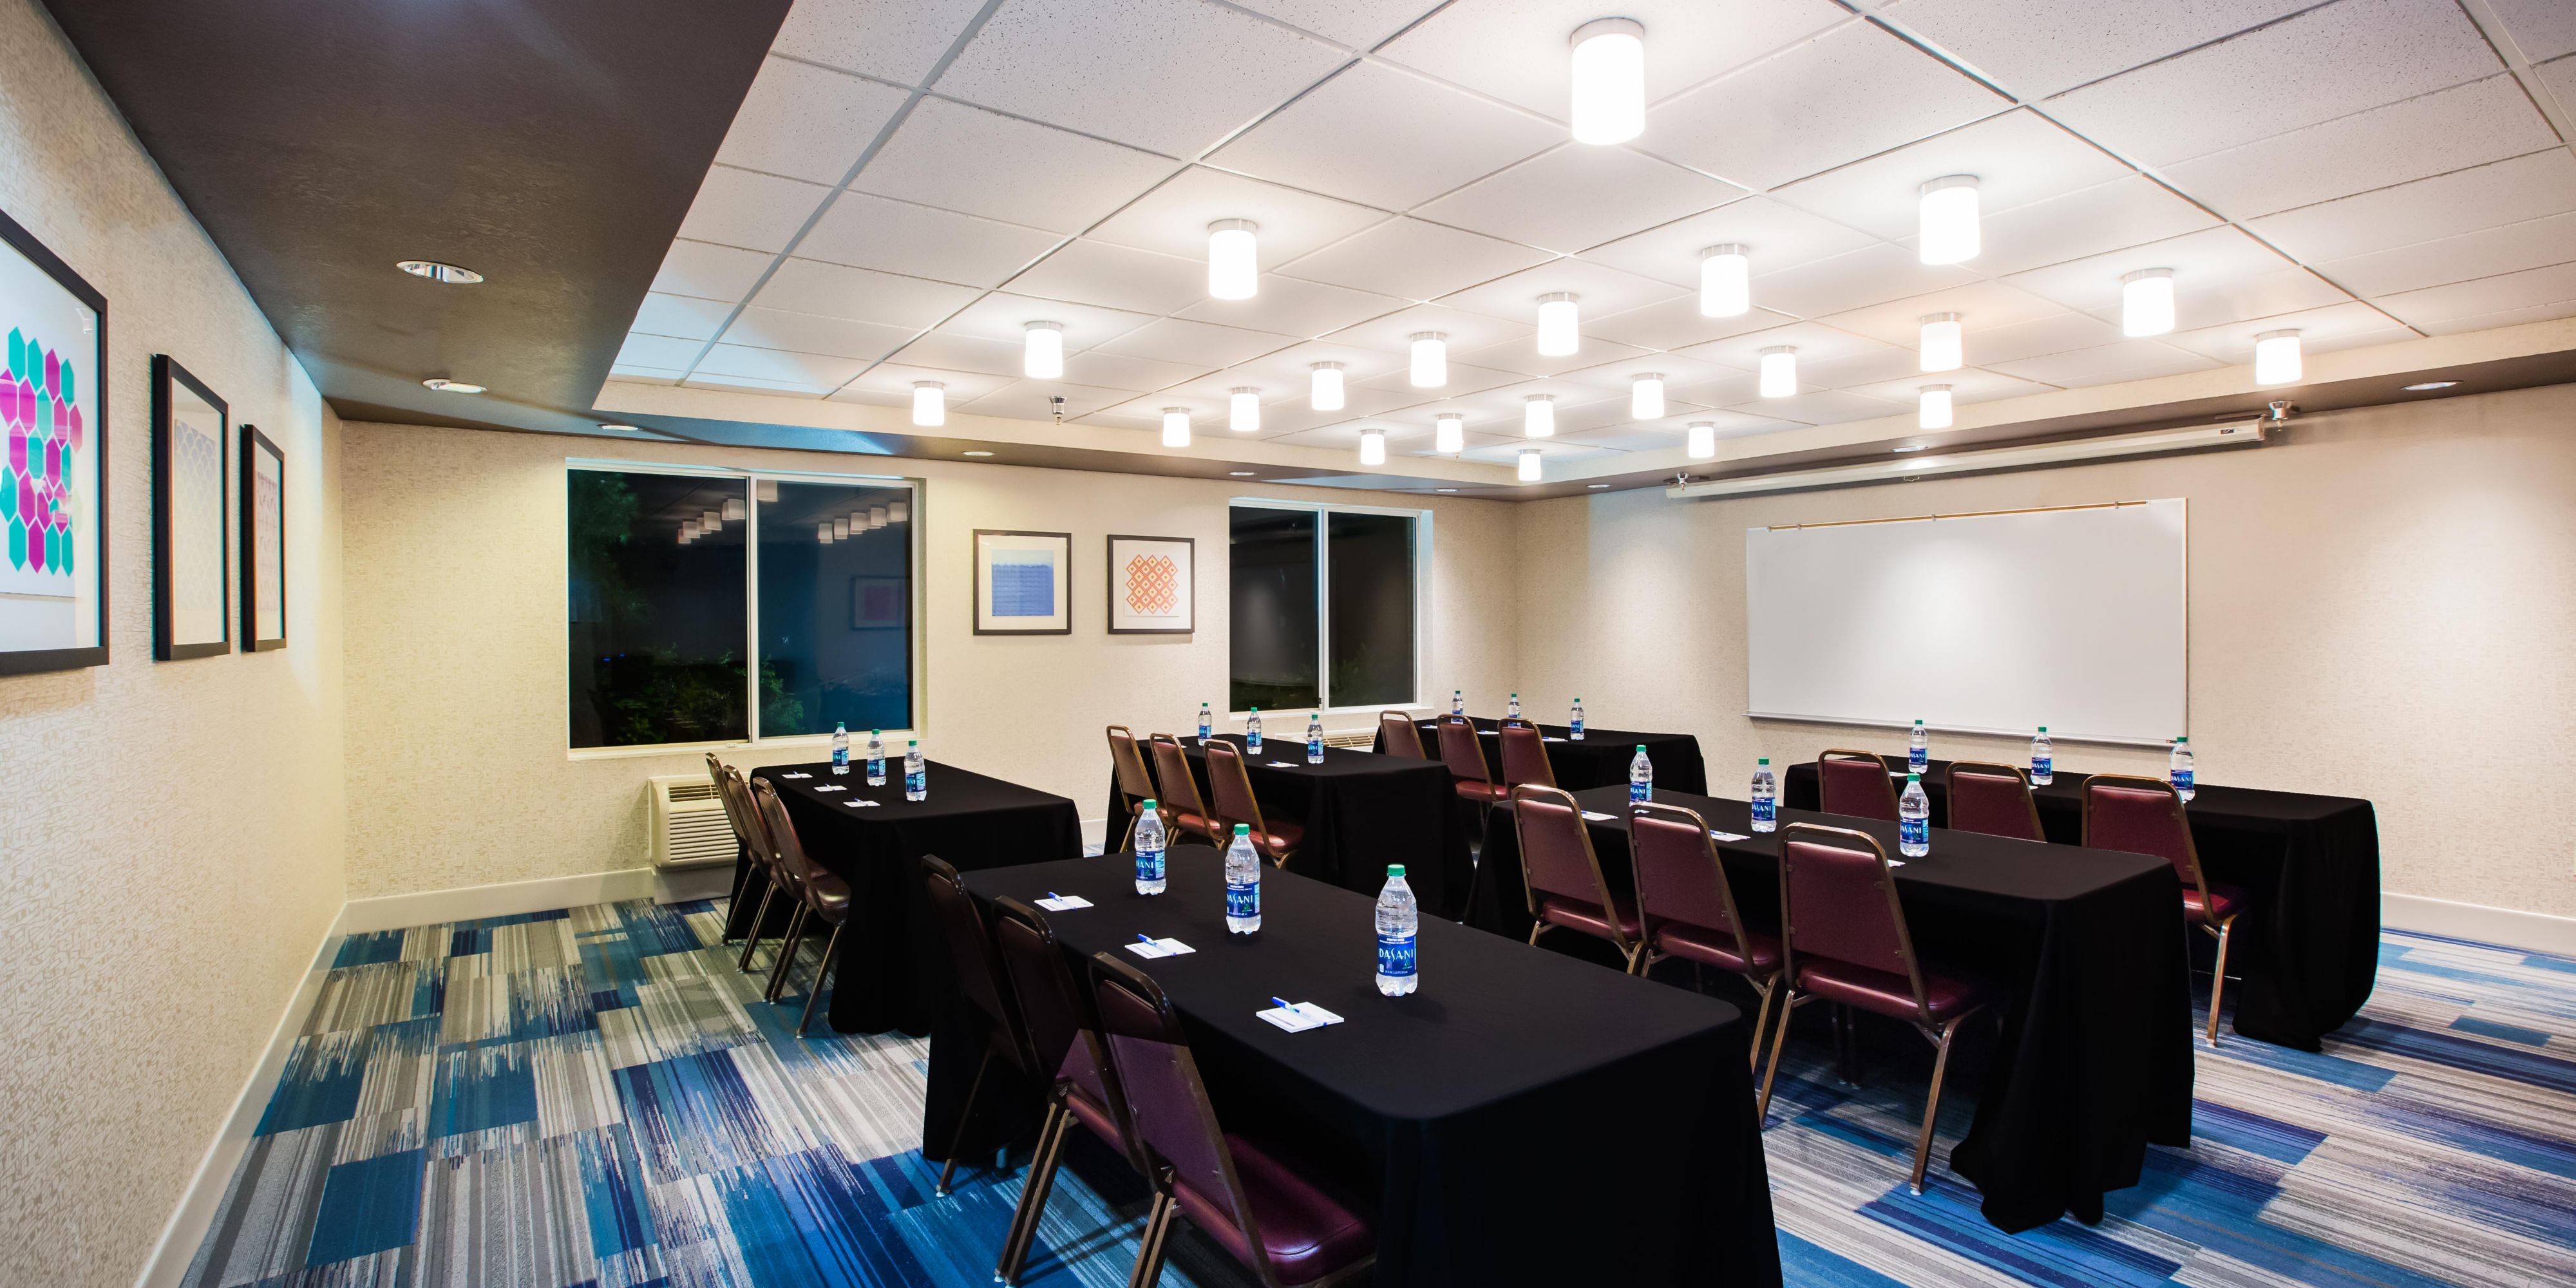 Meeting room rental is available for parties under 10 people. Guests are able to bring in their own food, or have it catered. We would love to be the host of any of your event such as business meetings, graduations, birthday, showers, reunions, etc. Call to book today!